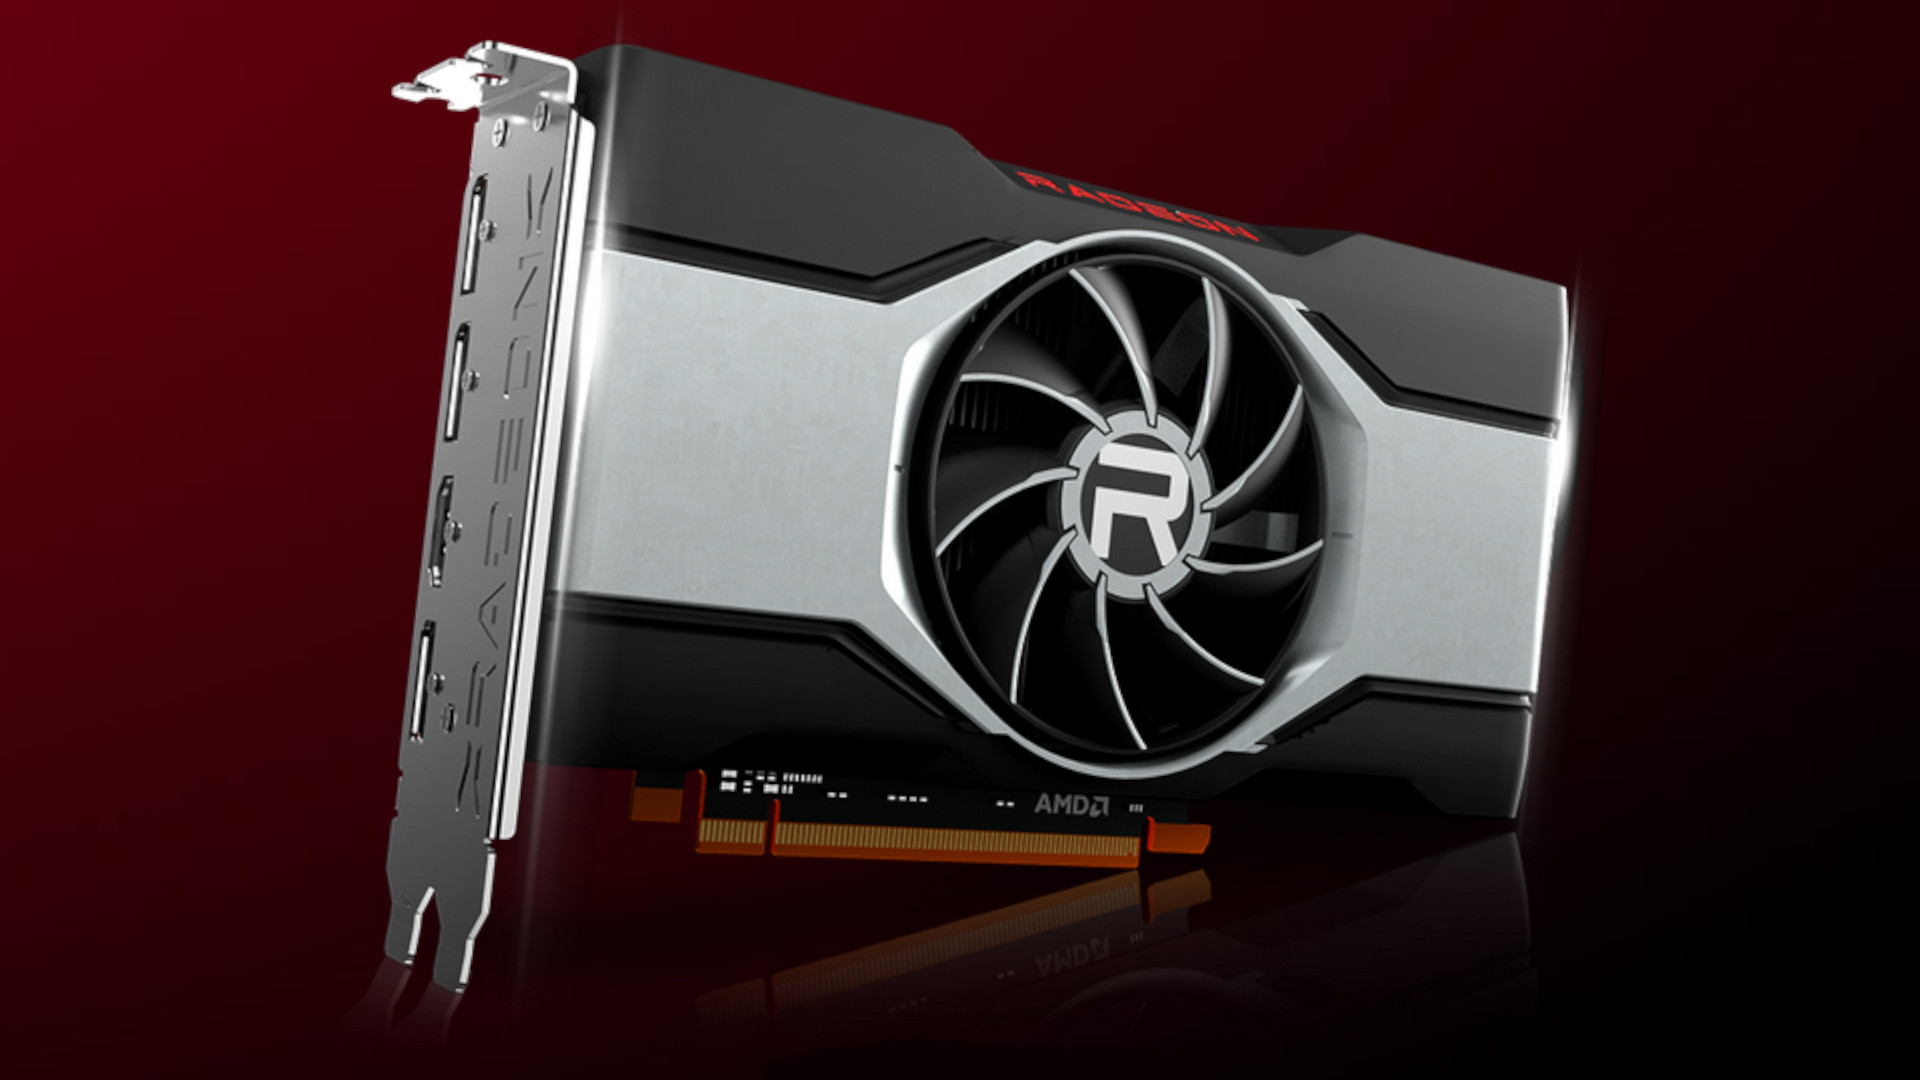 AMD Radeon RX 6600 reviews roundup – what do the critics think?